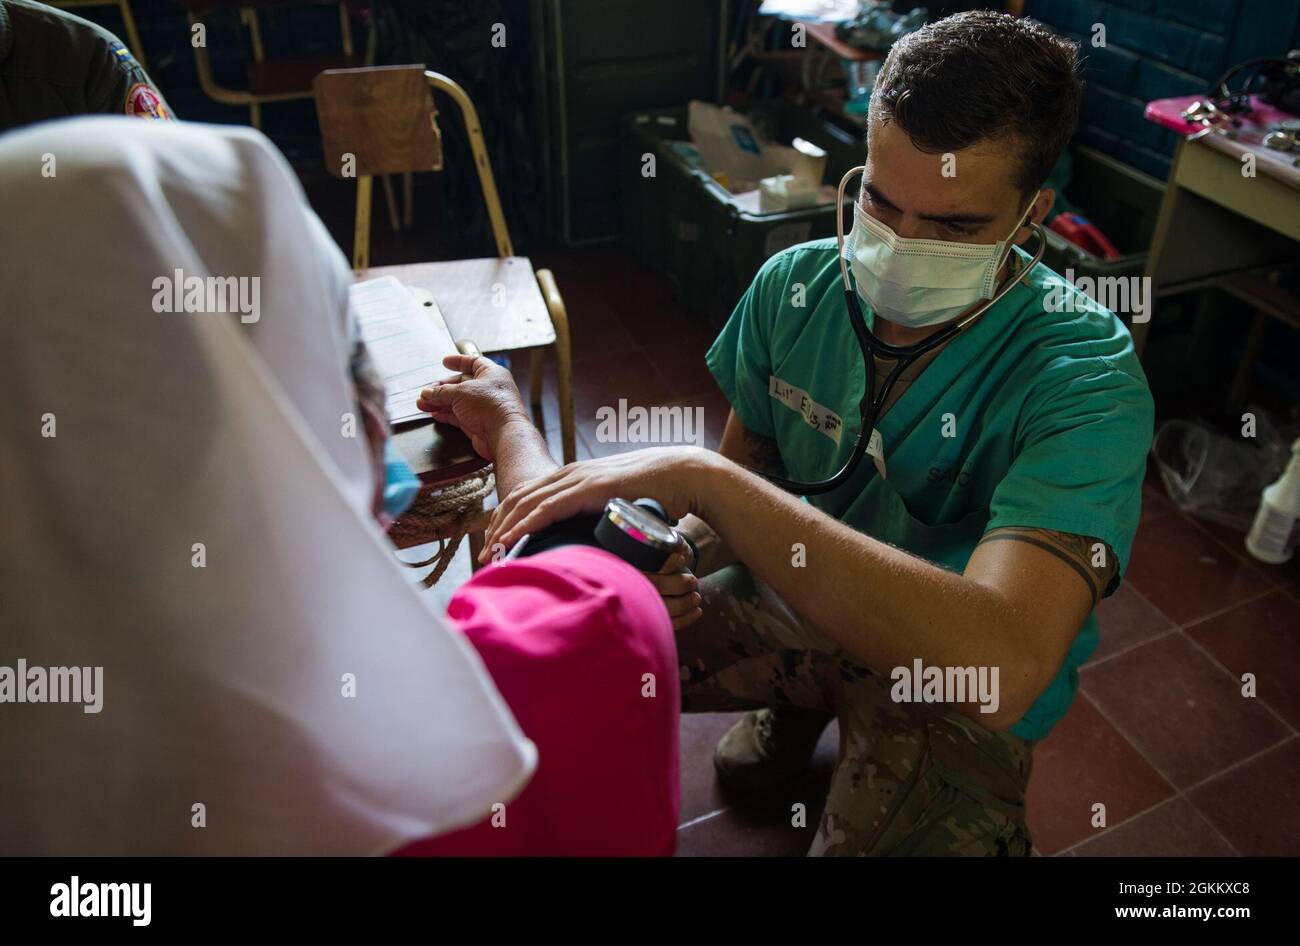 U.S. Army Sgt. Aaron Ellis, a medic with the Medical Element, Joint Task Force-Bravo, Soto Cano Air Base, Honduras, checks a Salvadoran woman’s blood pressure during a medical readiness training exercise for Resolute Sentinel 21 in Jaguey, El Salvador, May 20, 2021. Medical members treated 341 Salvadoran patients through preventative medicine, primary care, dental, and pharmacy services during the exercise. Stock Photo